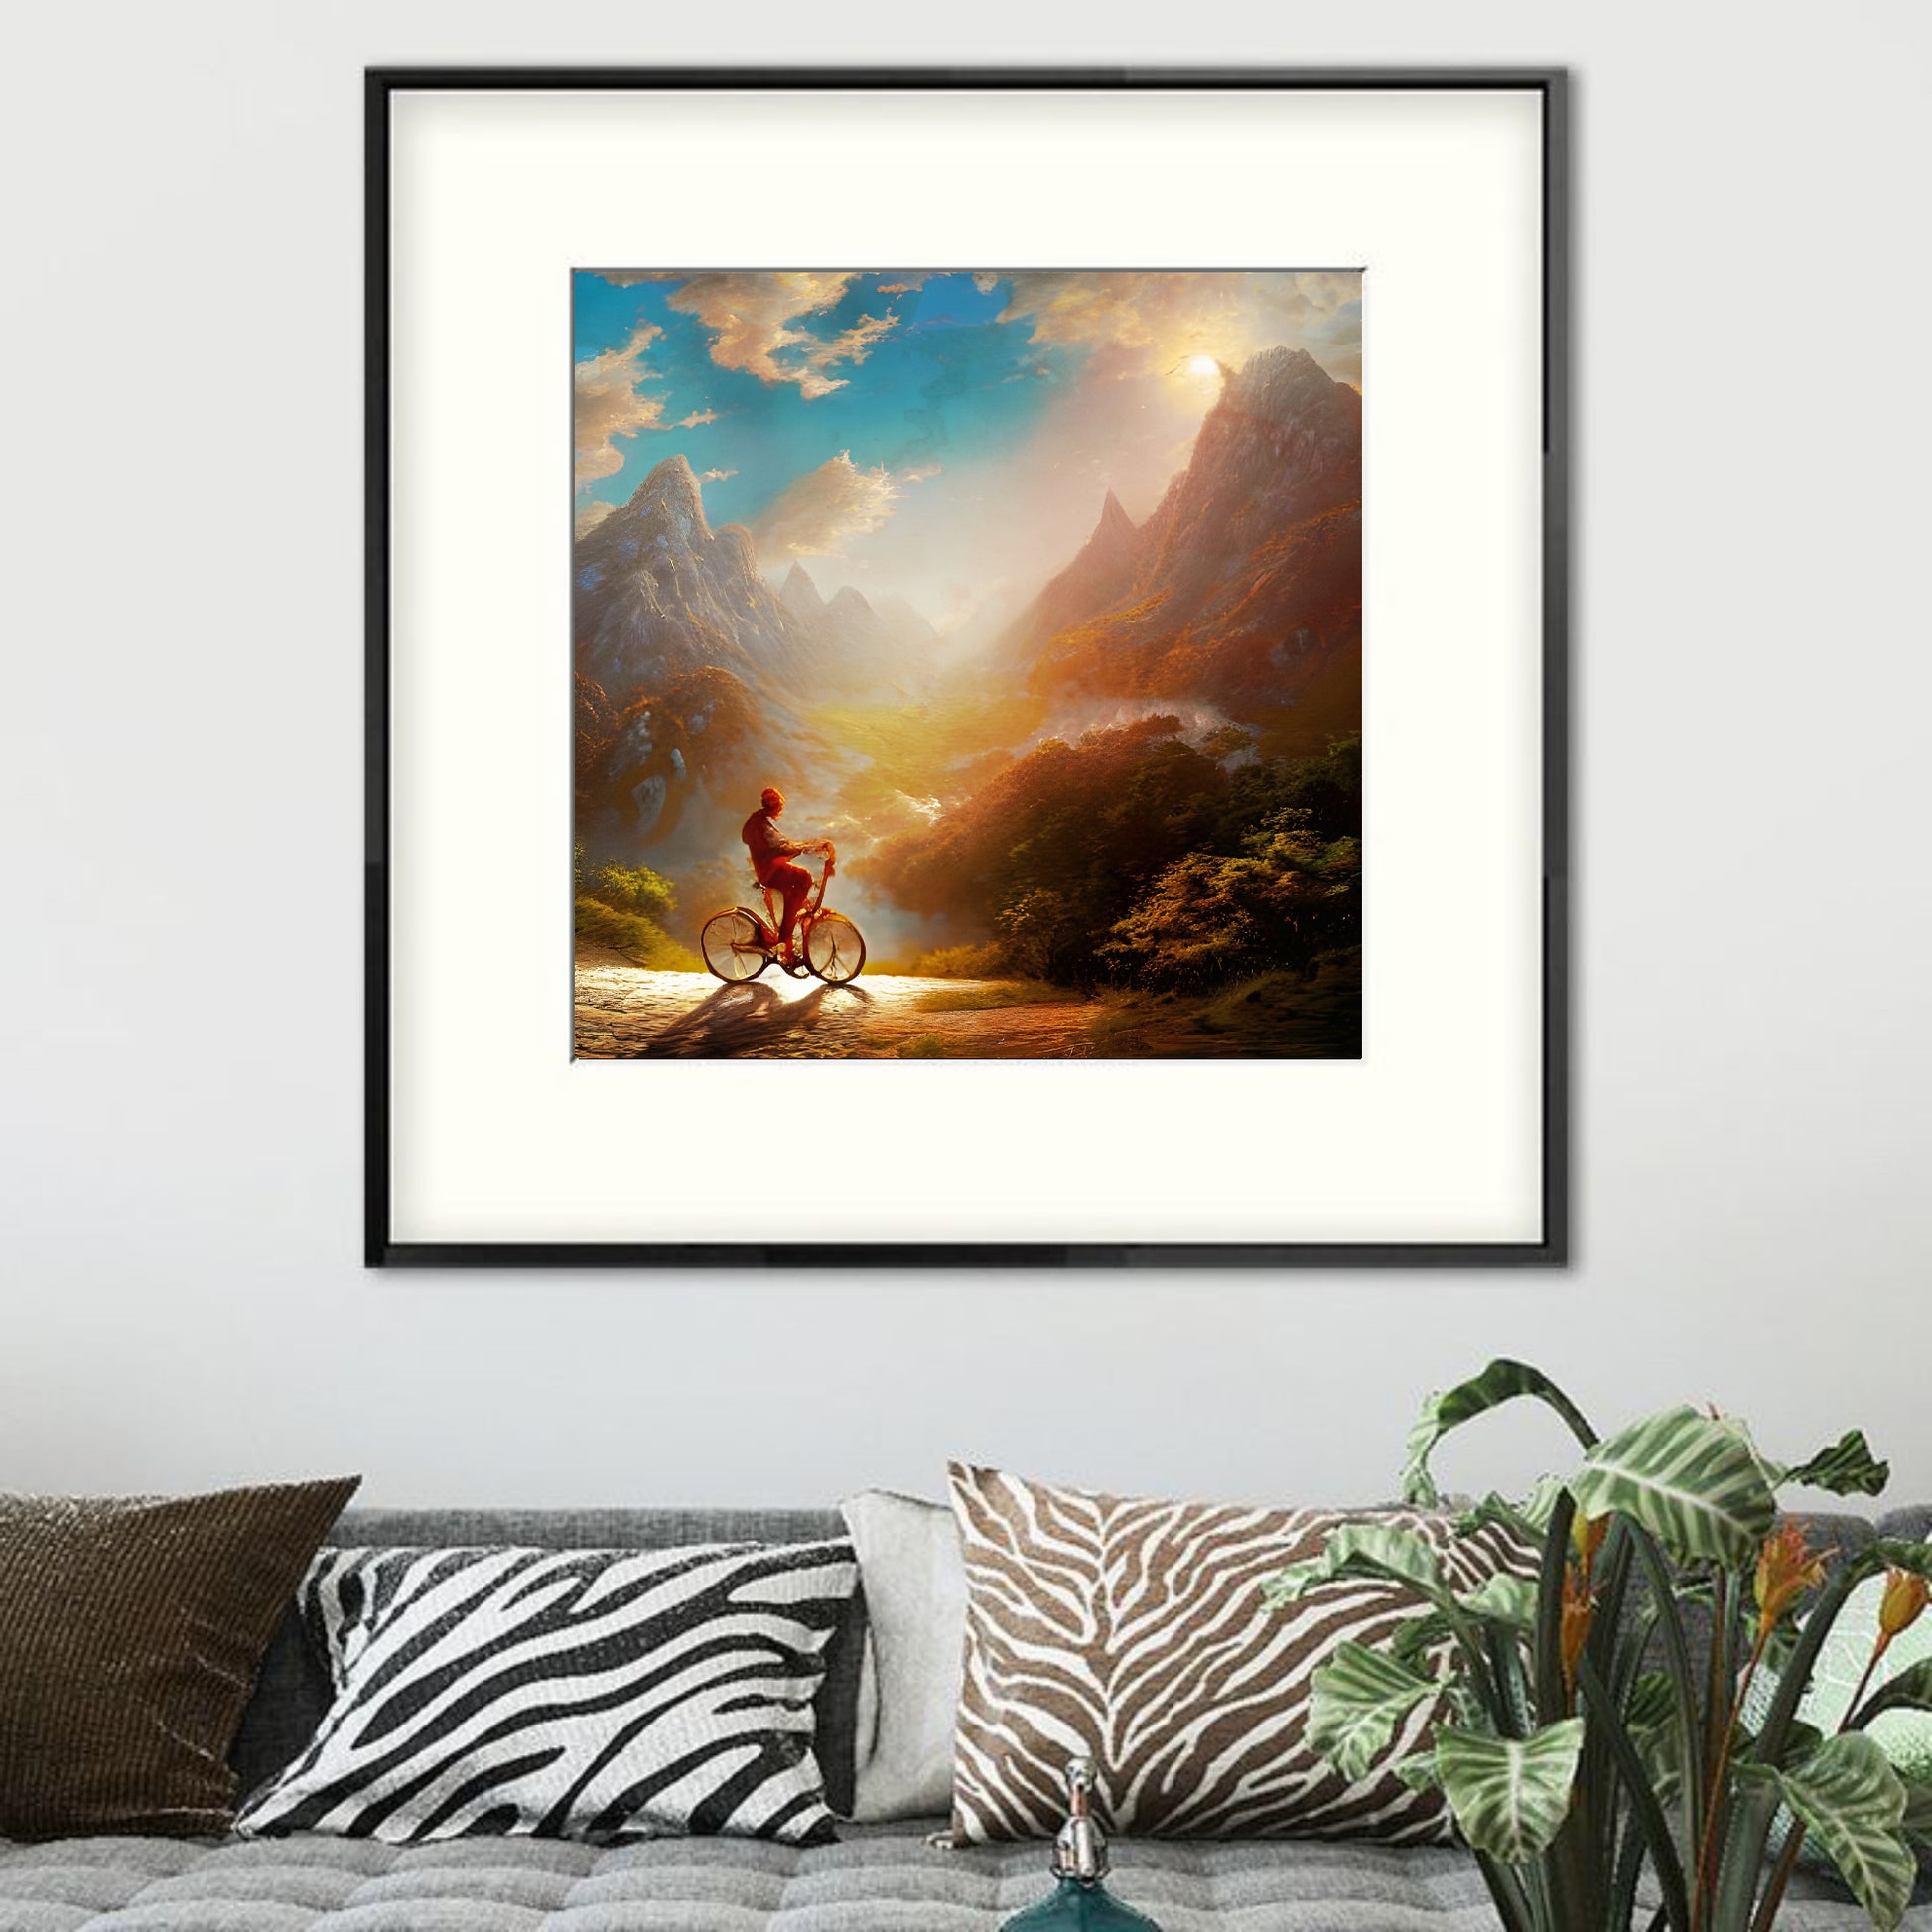 Cyclist in mountains fine art poster